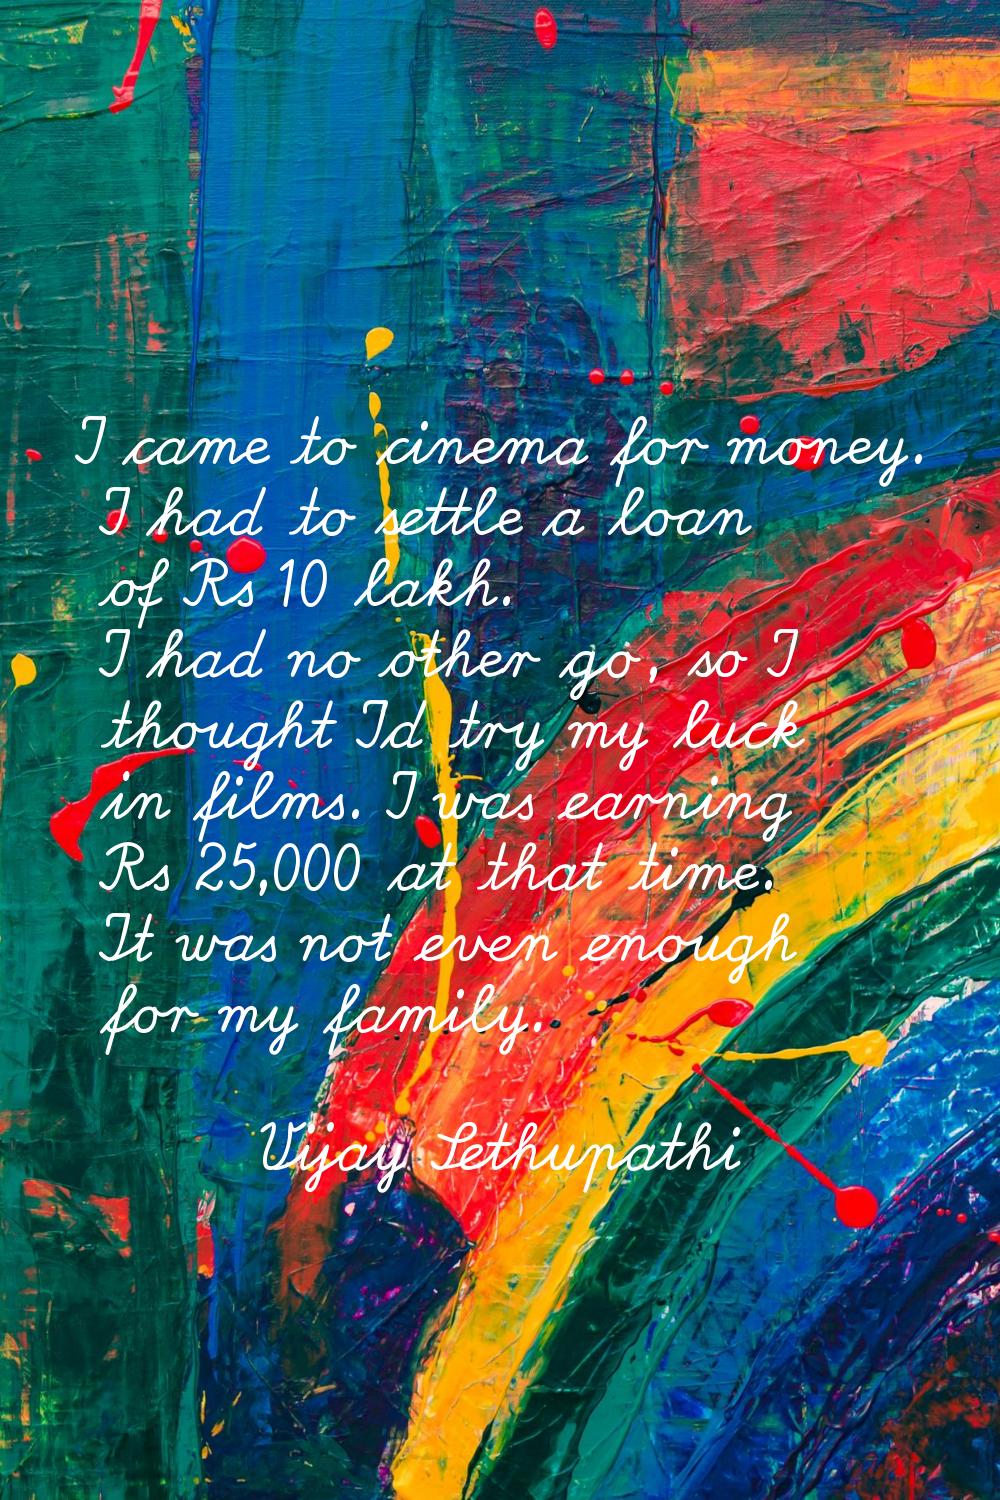 I came to cinema for money. I had to settle a loan of Rs 10 lakh. I had no other go, so I thought I